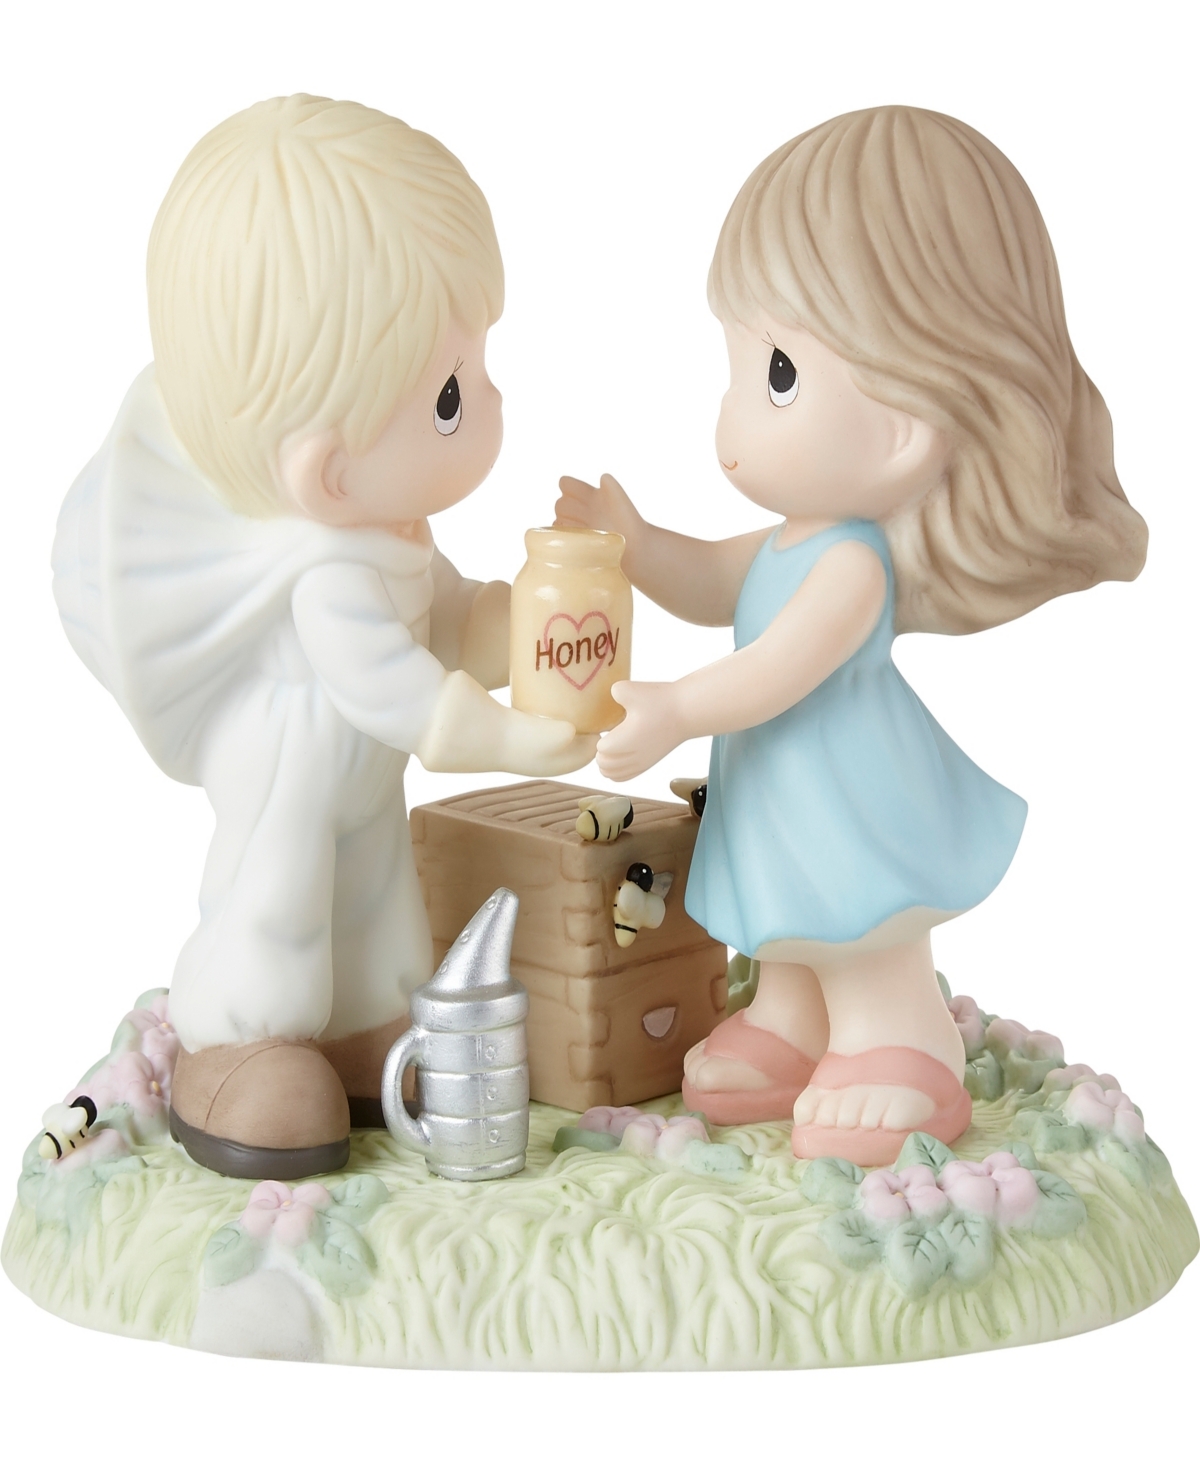 Precious Moments 222004 You'll Always Bee My Honey Porcelain Figurine In Multicolored